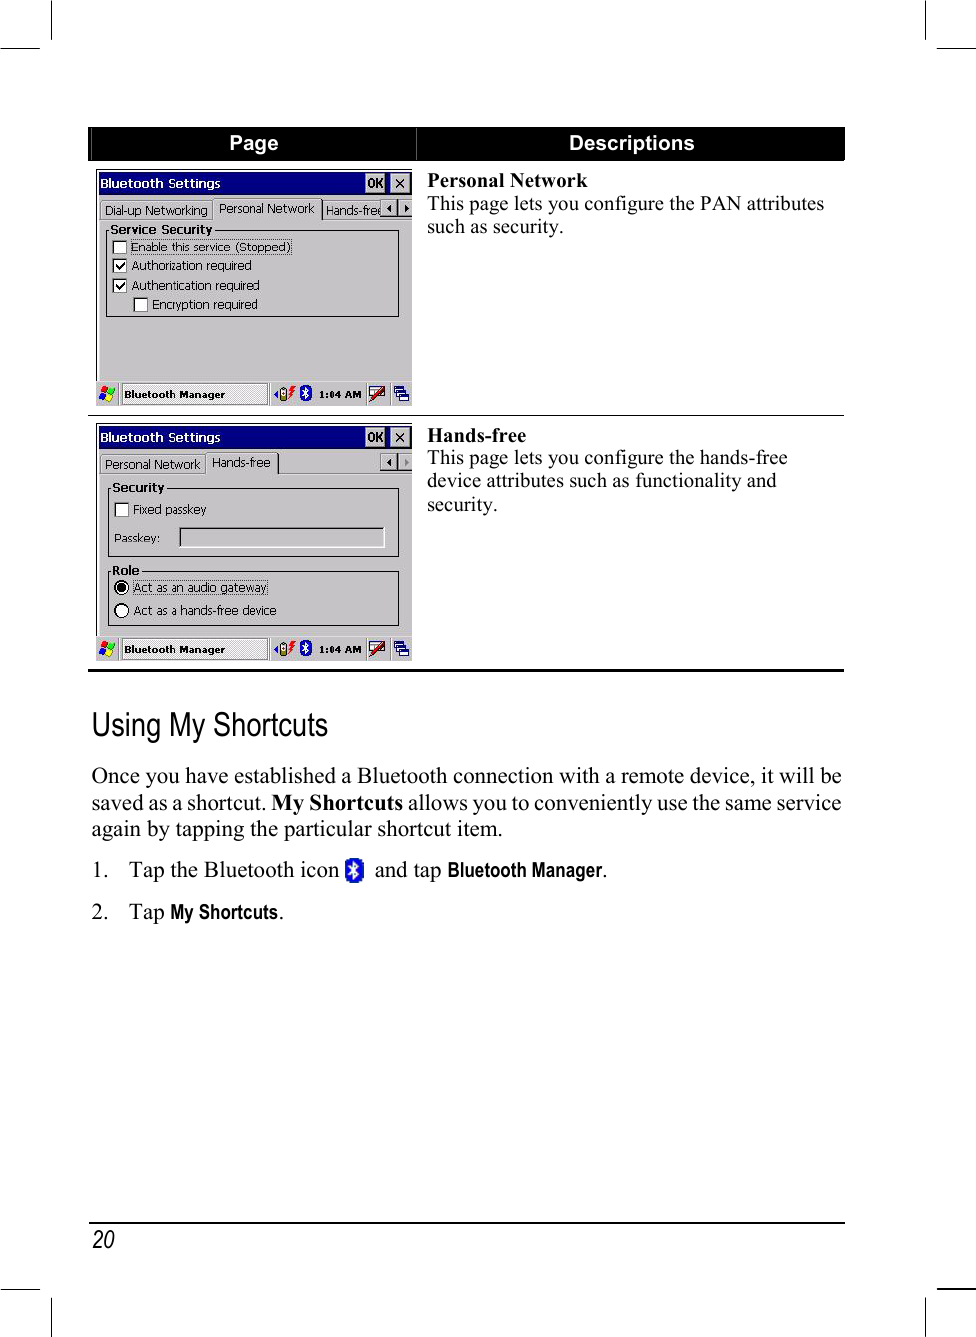  20 Page  Descriptions Personal Network This page lets you configure the PAN attributes such as security. Hands-free This page lets you configure the hands-free device attributes such as functionality and security.  Using My Shortcuts Once you have established a Bluetooth connection with a remote device, it will be saved as a shortcut. My Shortcuts allows you to conveniently use the same service again by tapping the particular shortcut item. 1.  Tap the Bluetooth icon    and tap Bluetooth Manager. 2. Tap My Shortcuts. 